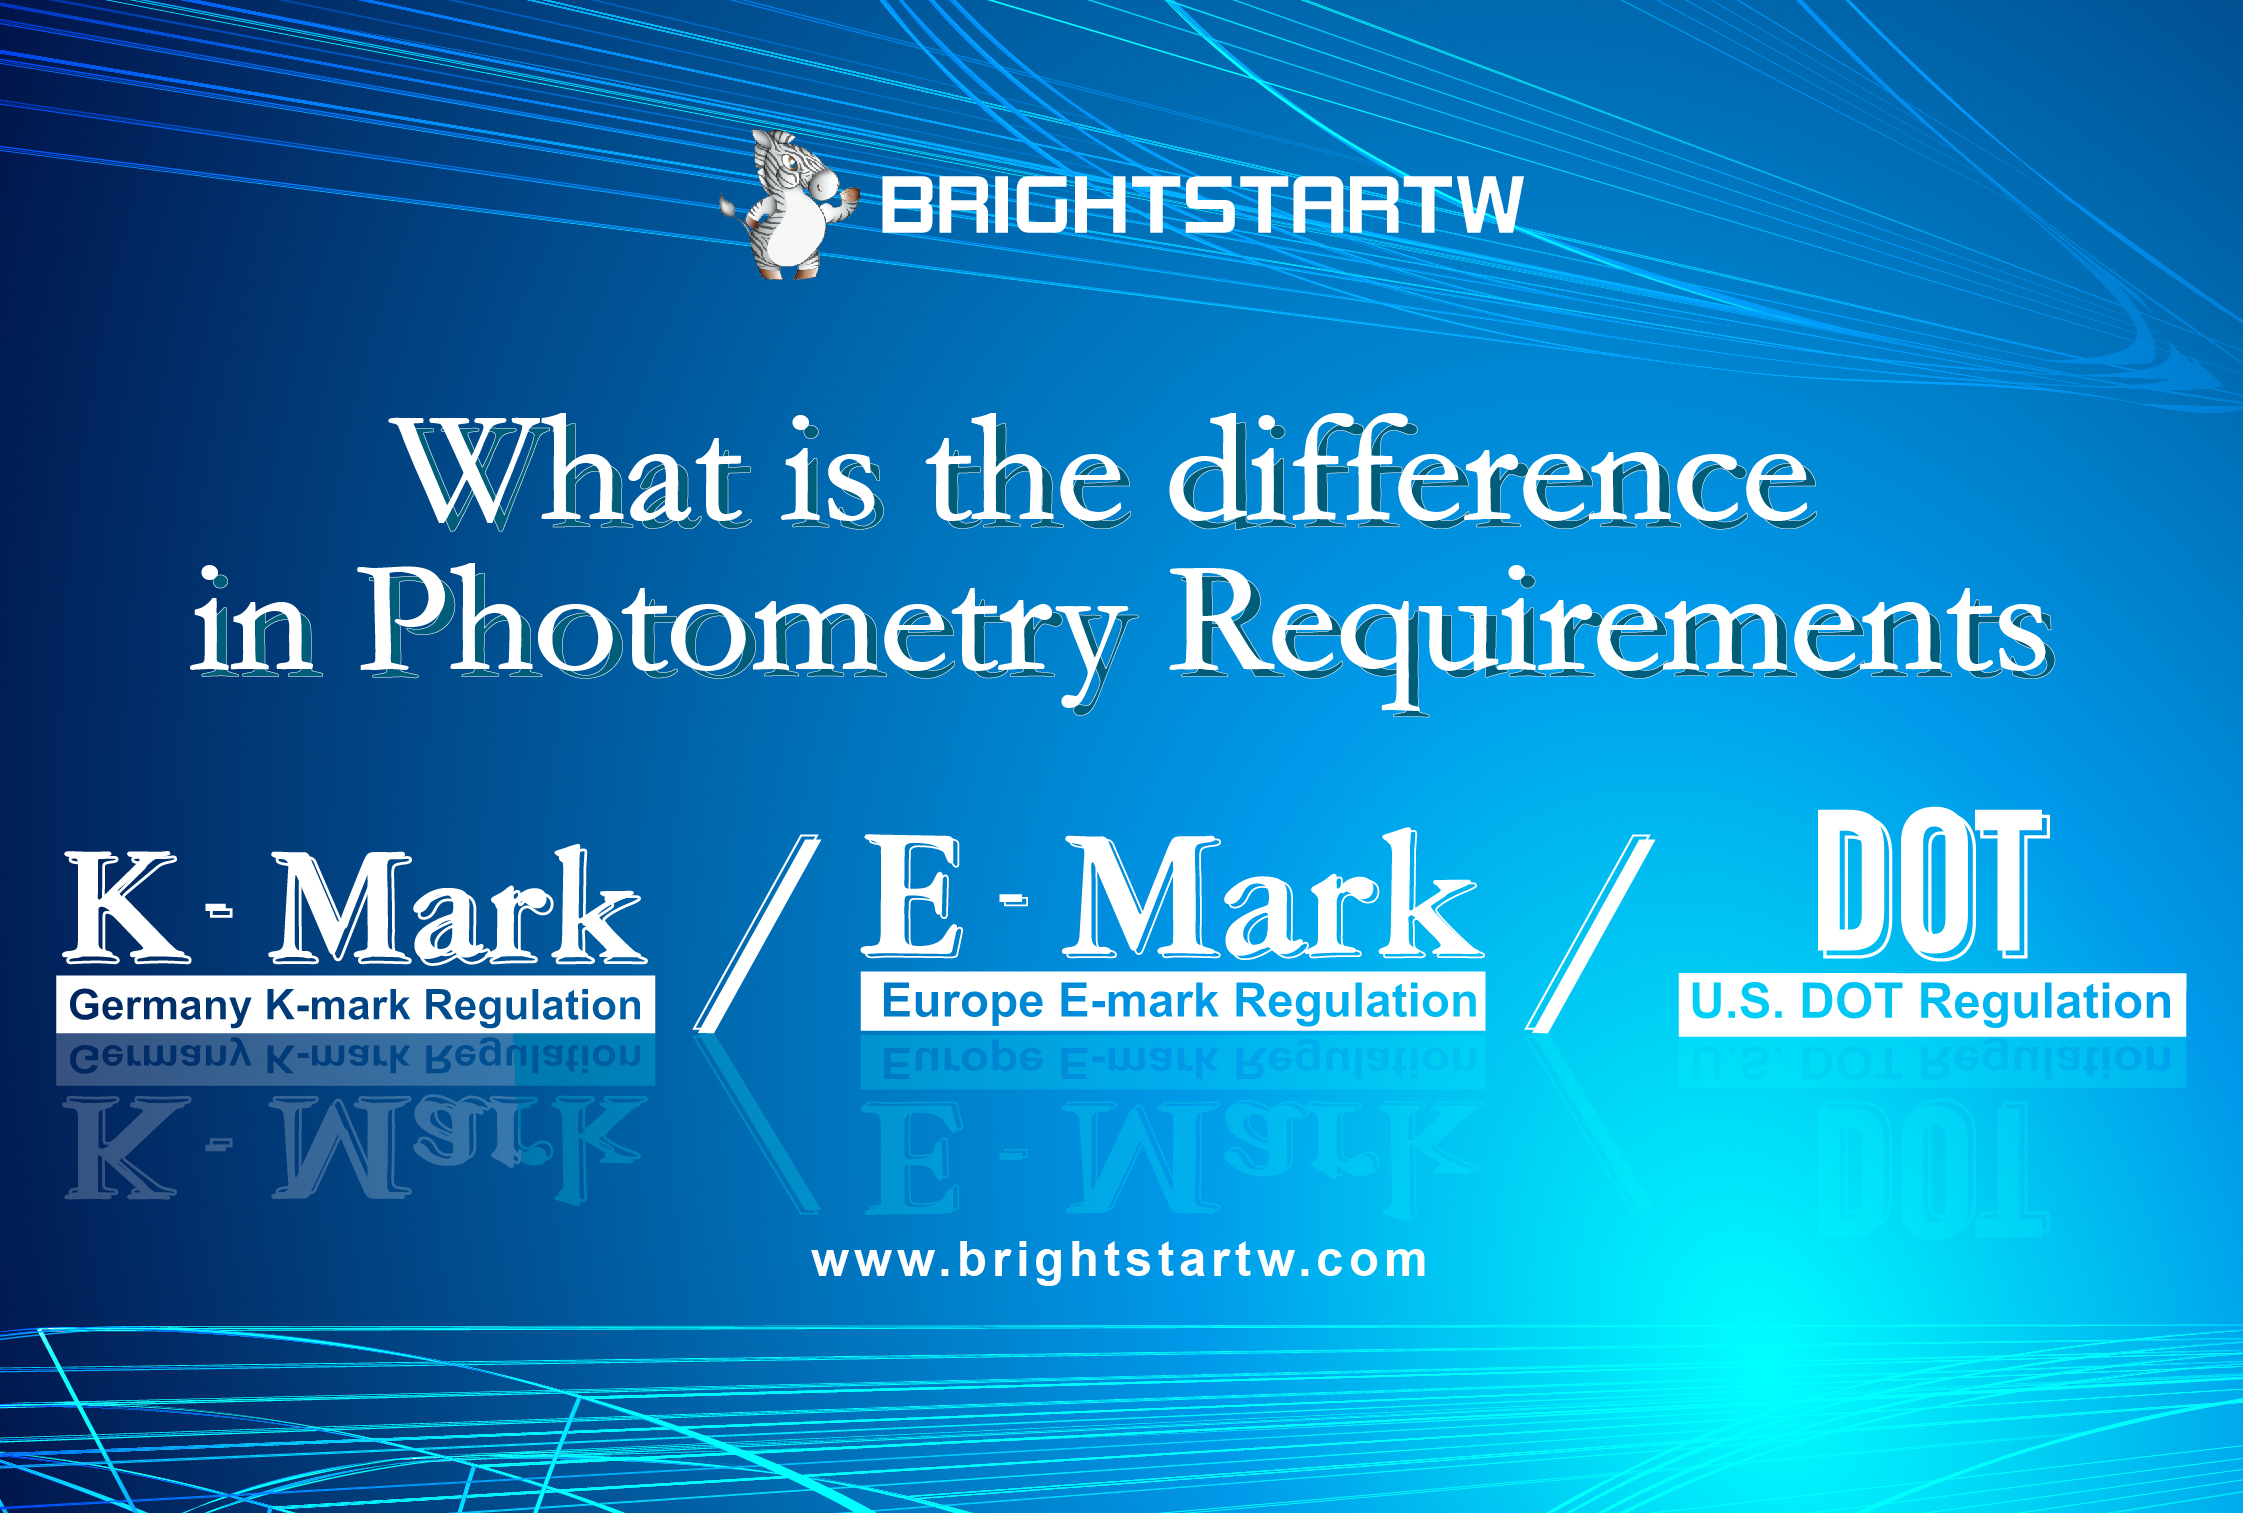 DOT Compliant & E-MARK & K-MARK - What is the difference?